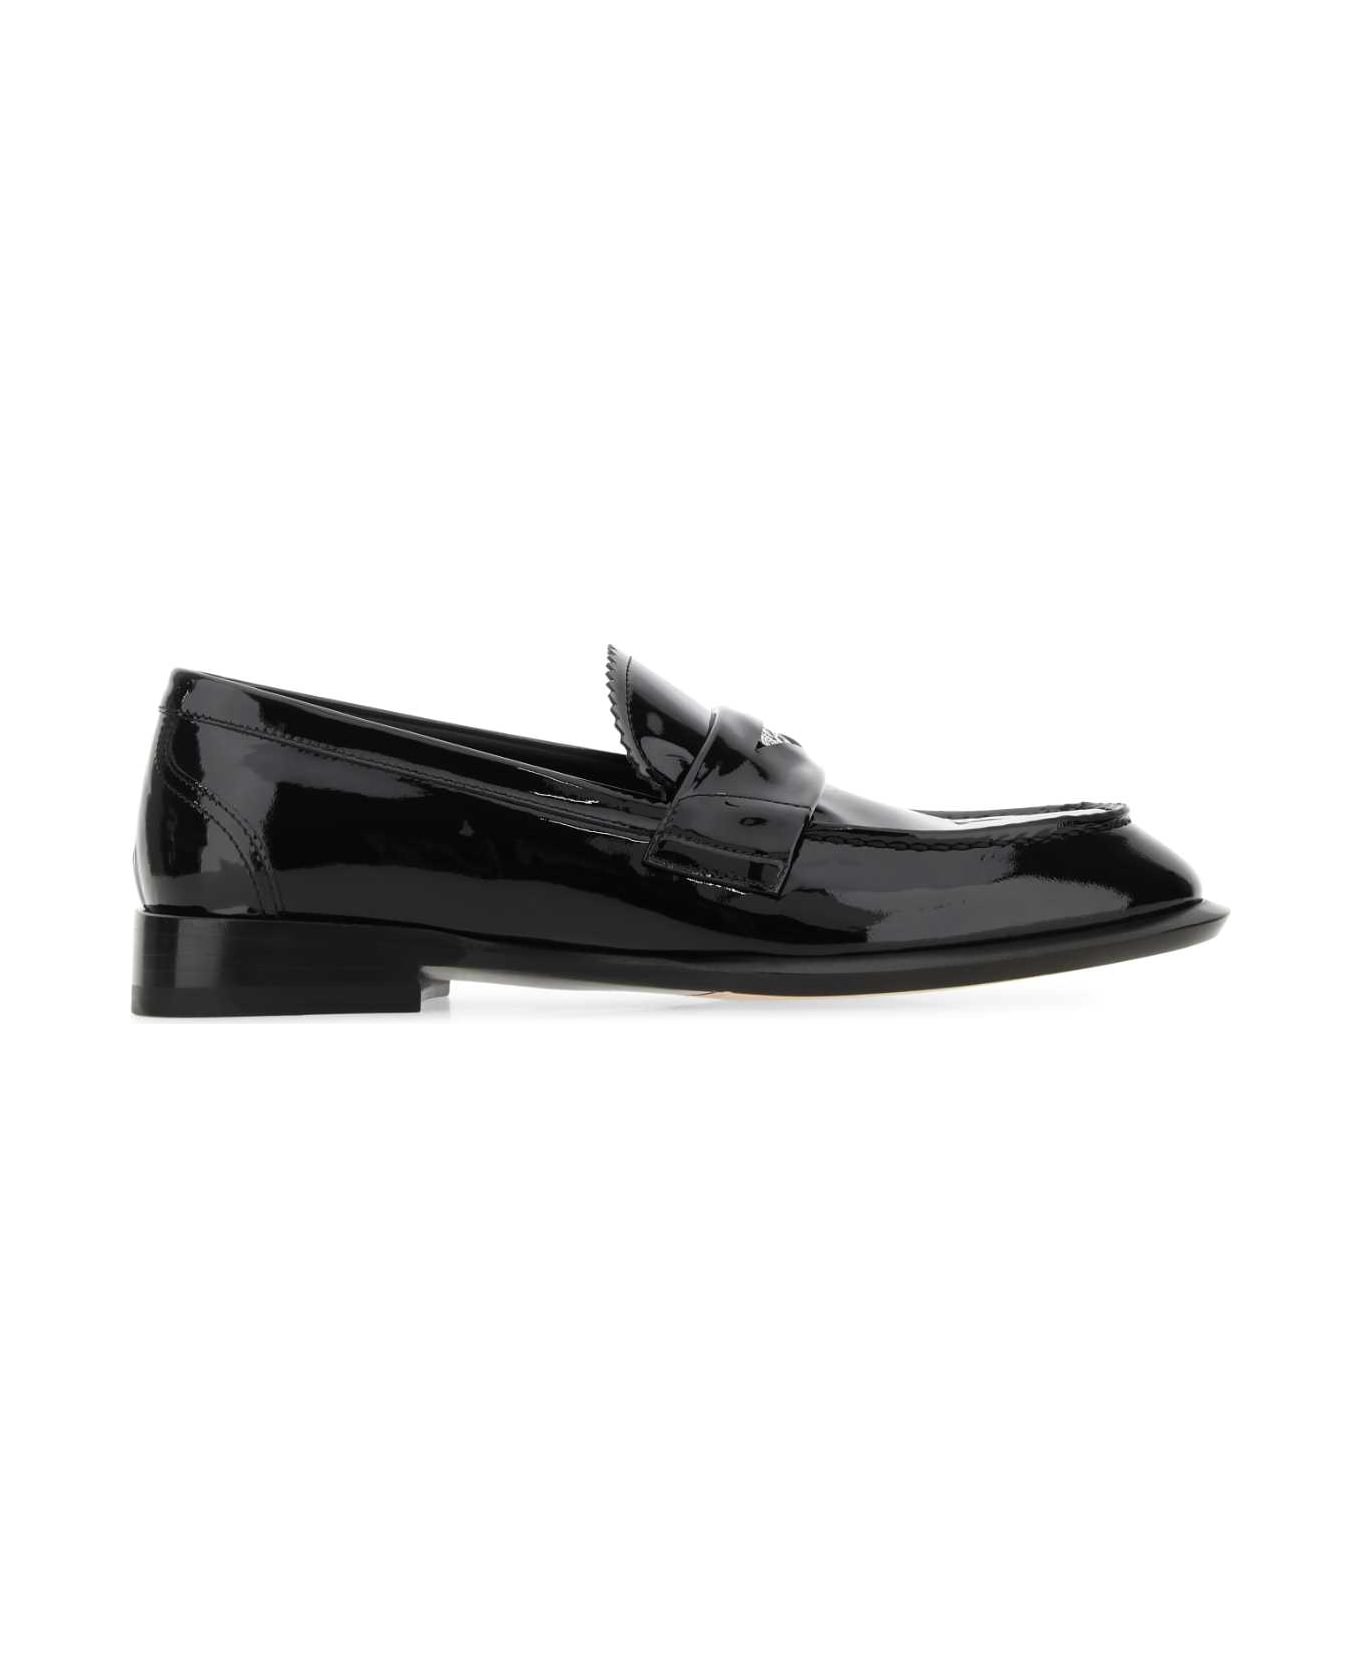 Alexander McQueen Black Leather Loafers - 1081